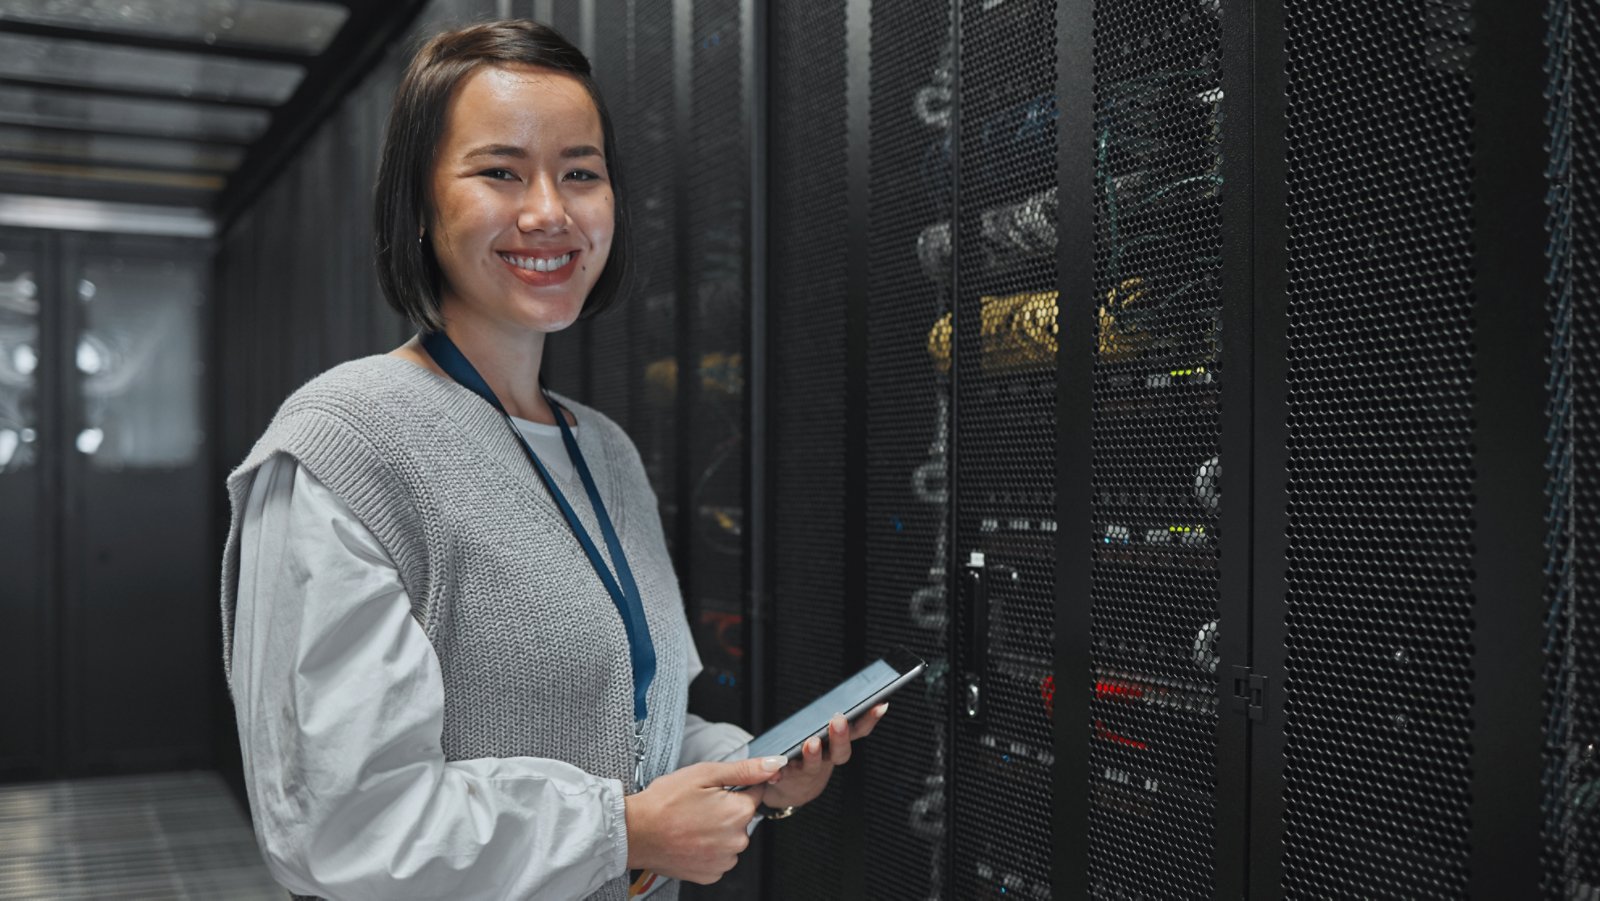 Asian woman, portrait and tablet of technician by server for networking, maintenance or systems at office. Happy female engineer smile for cable service, power or data administration or management.